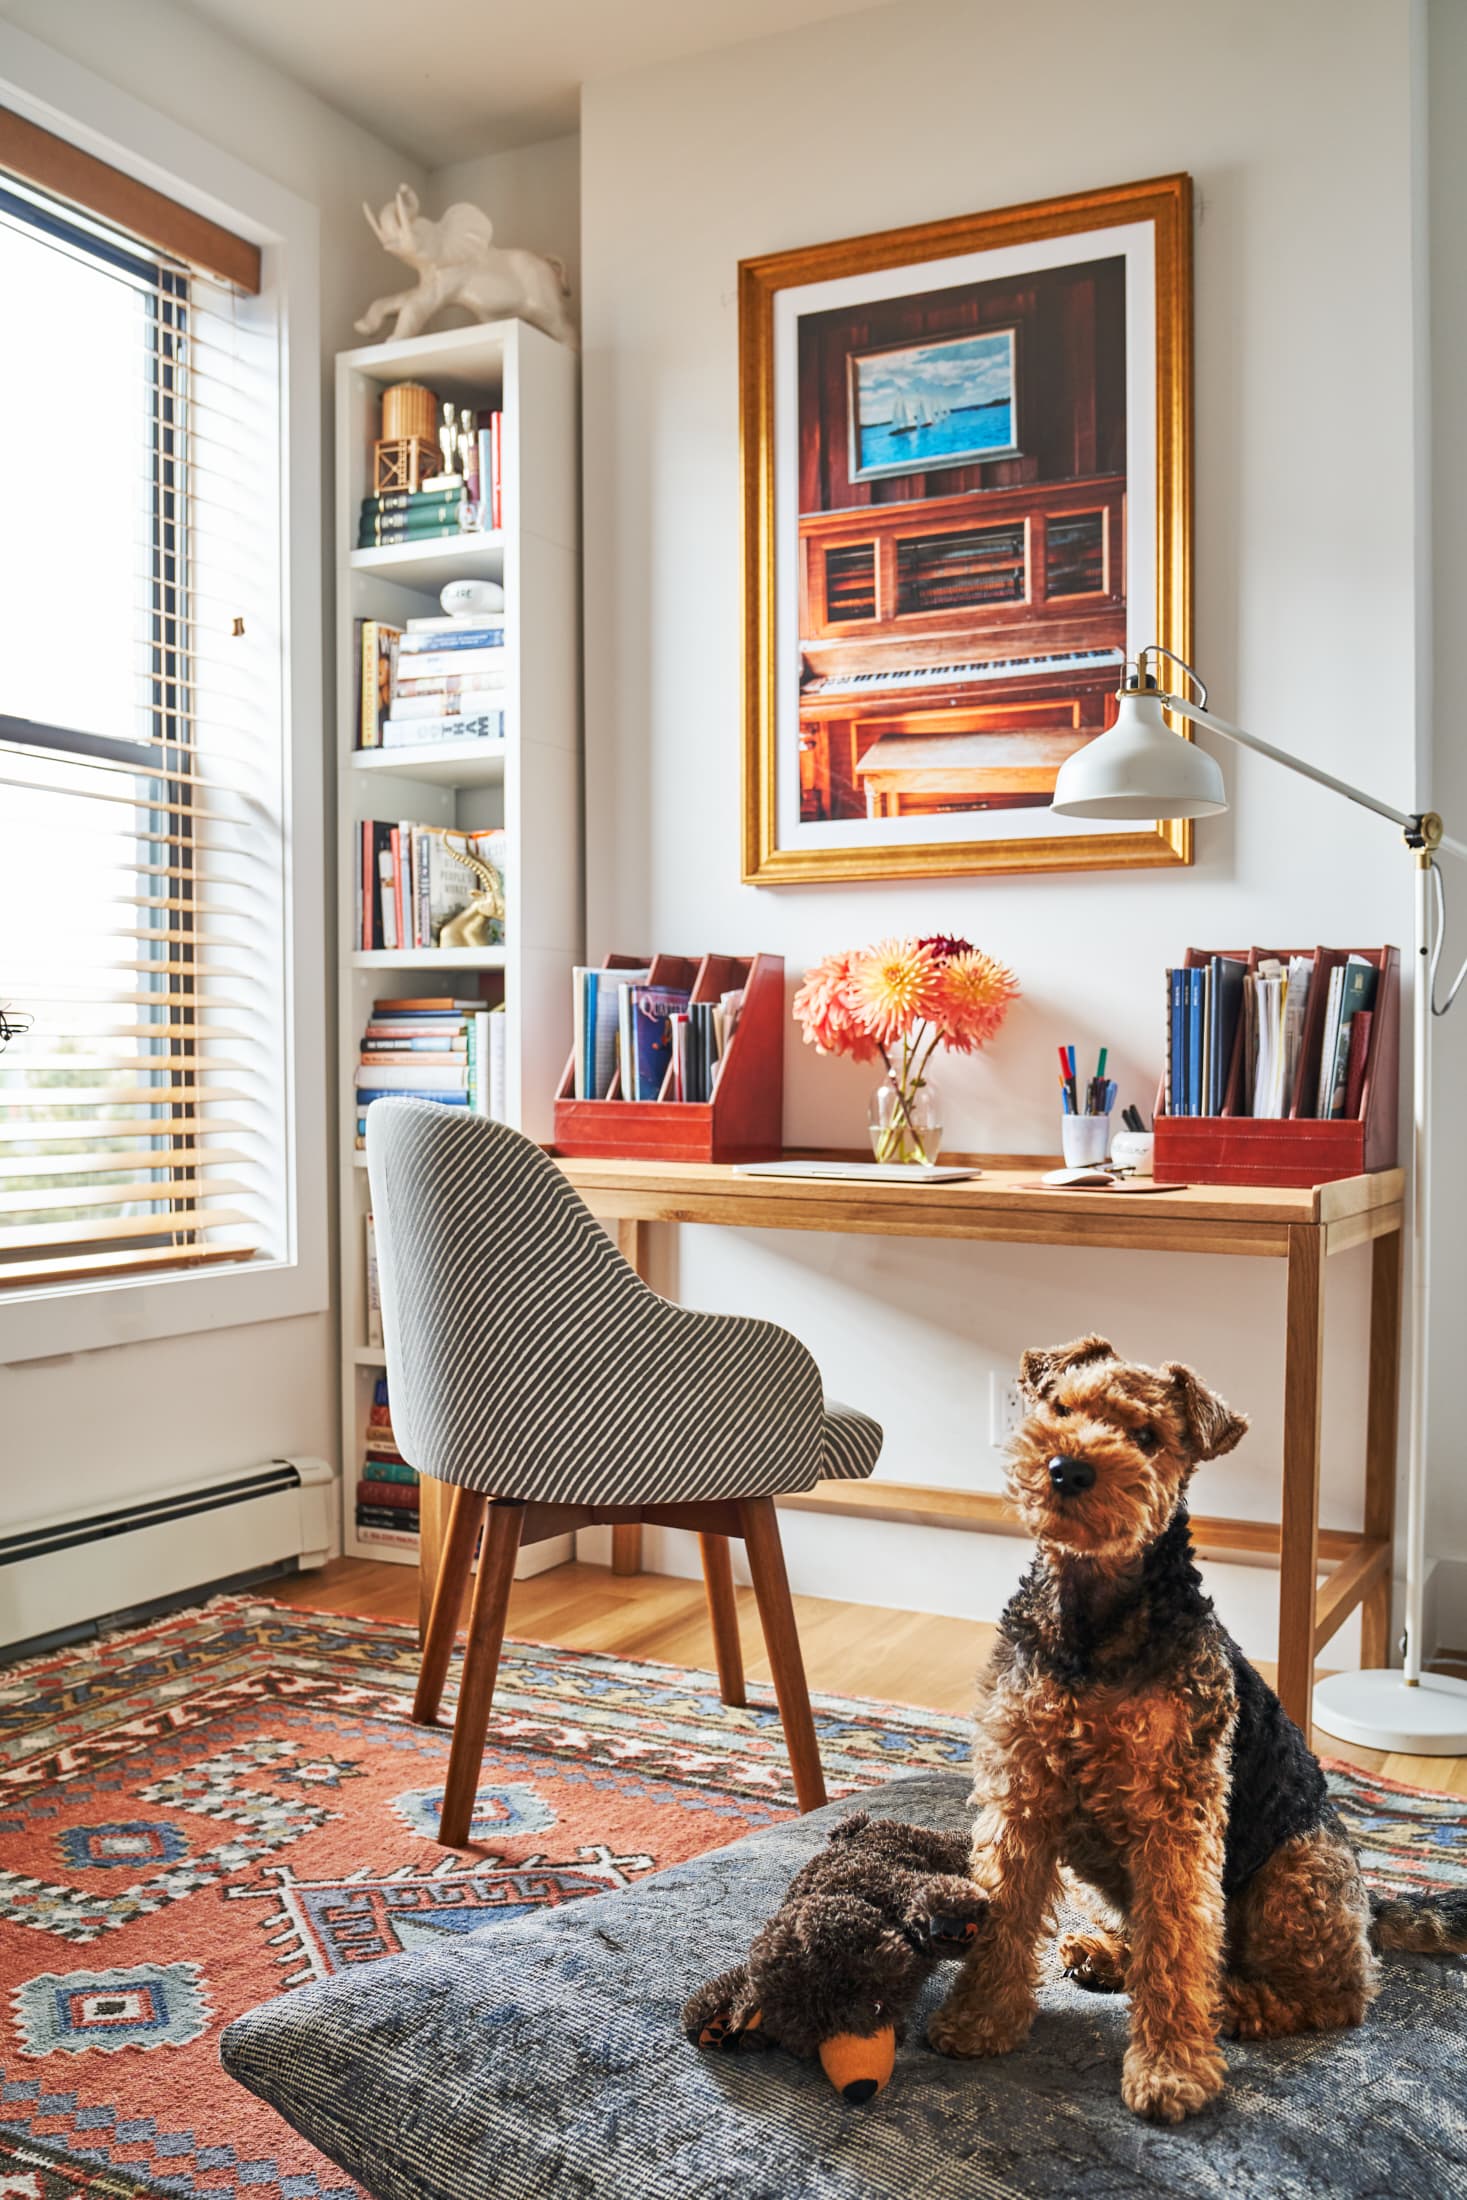 Five practical tips for pet proofing your home - RugPadUSA